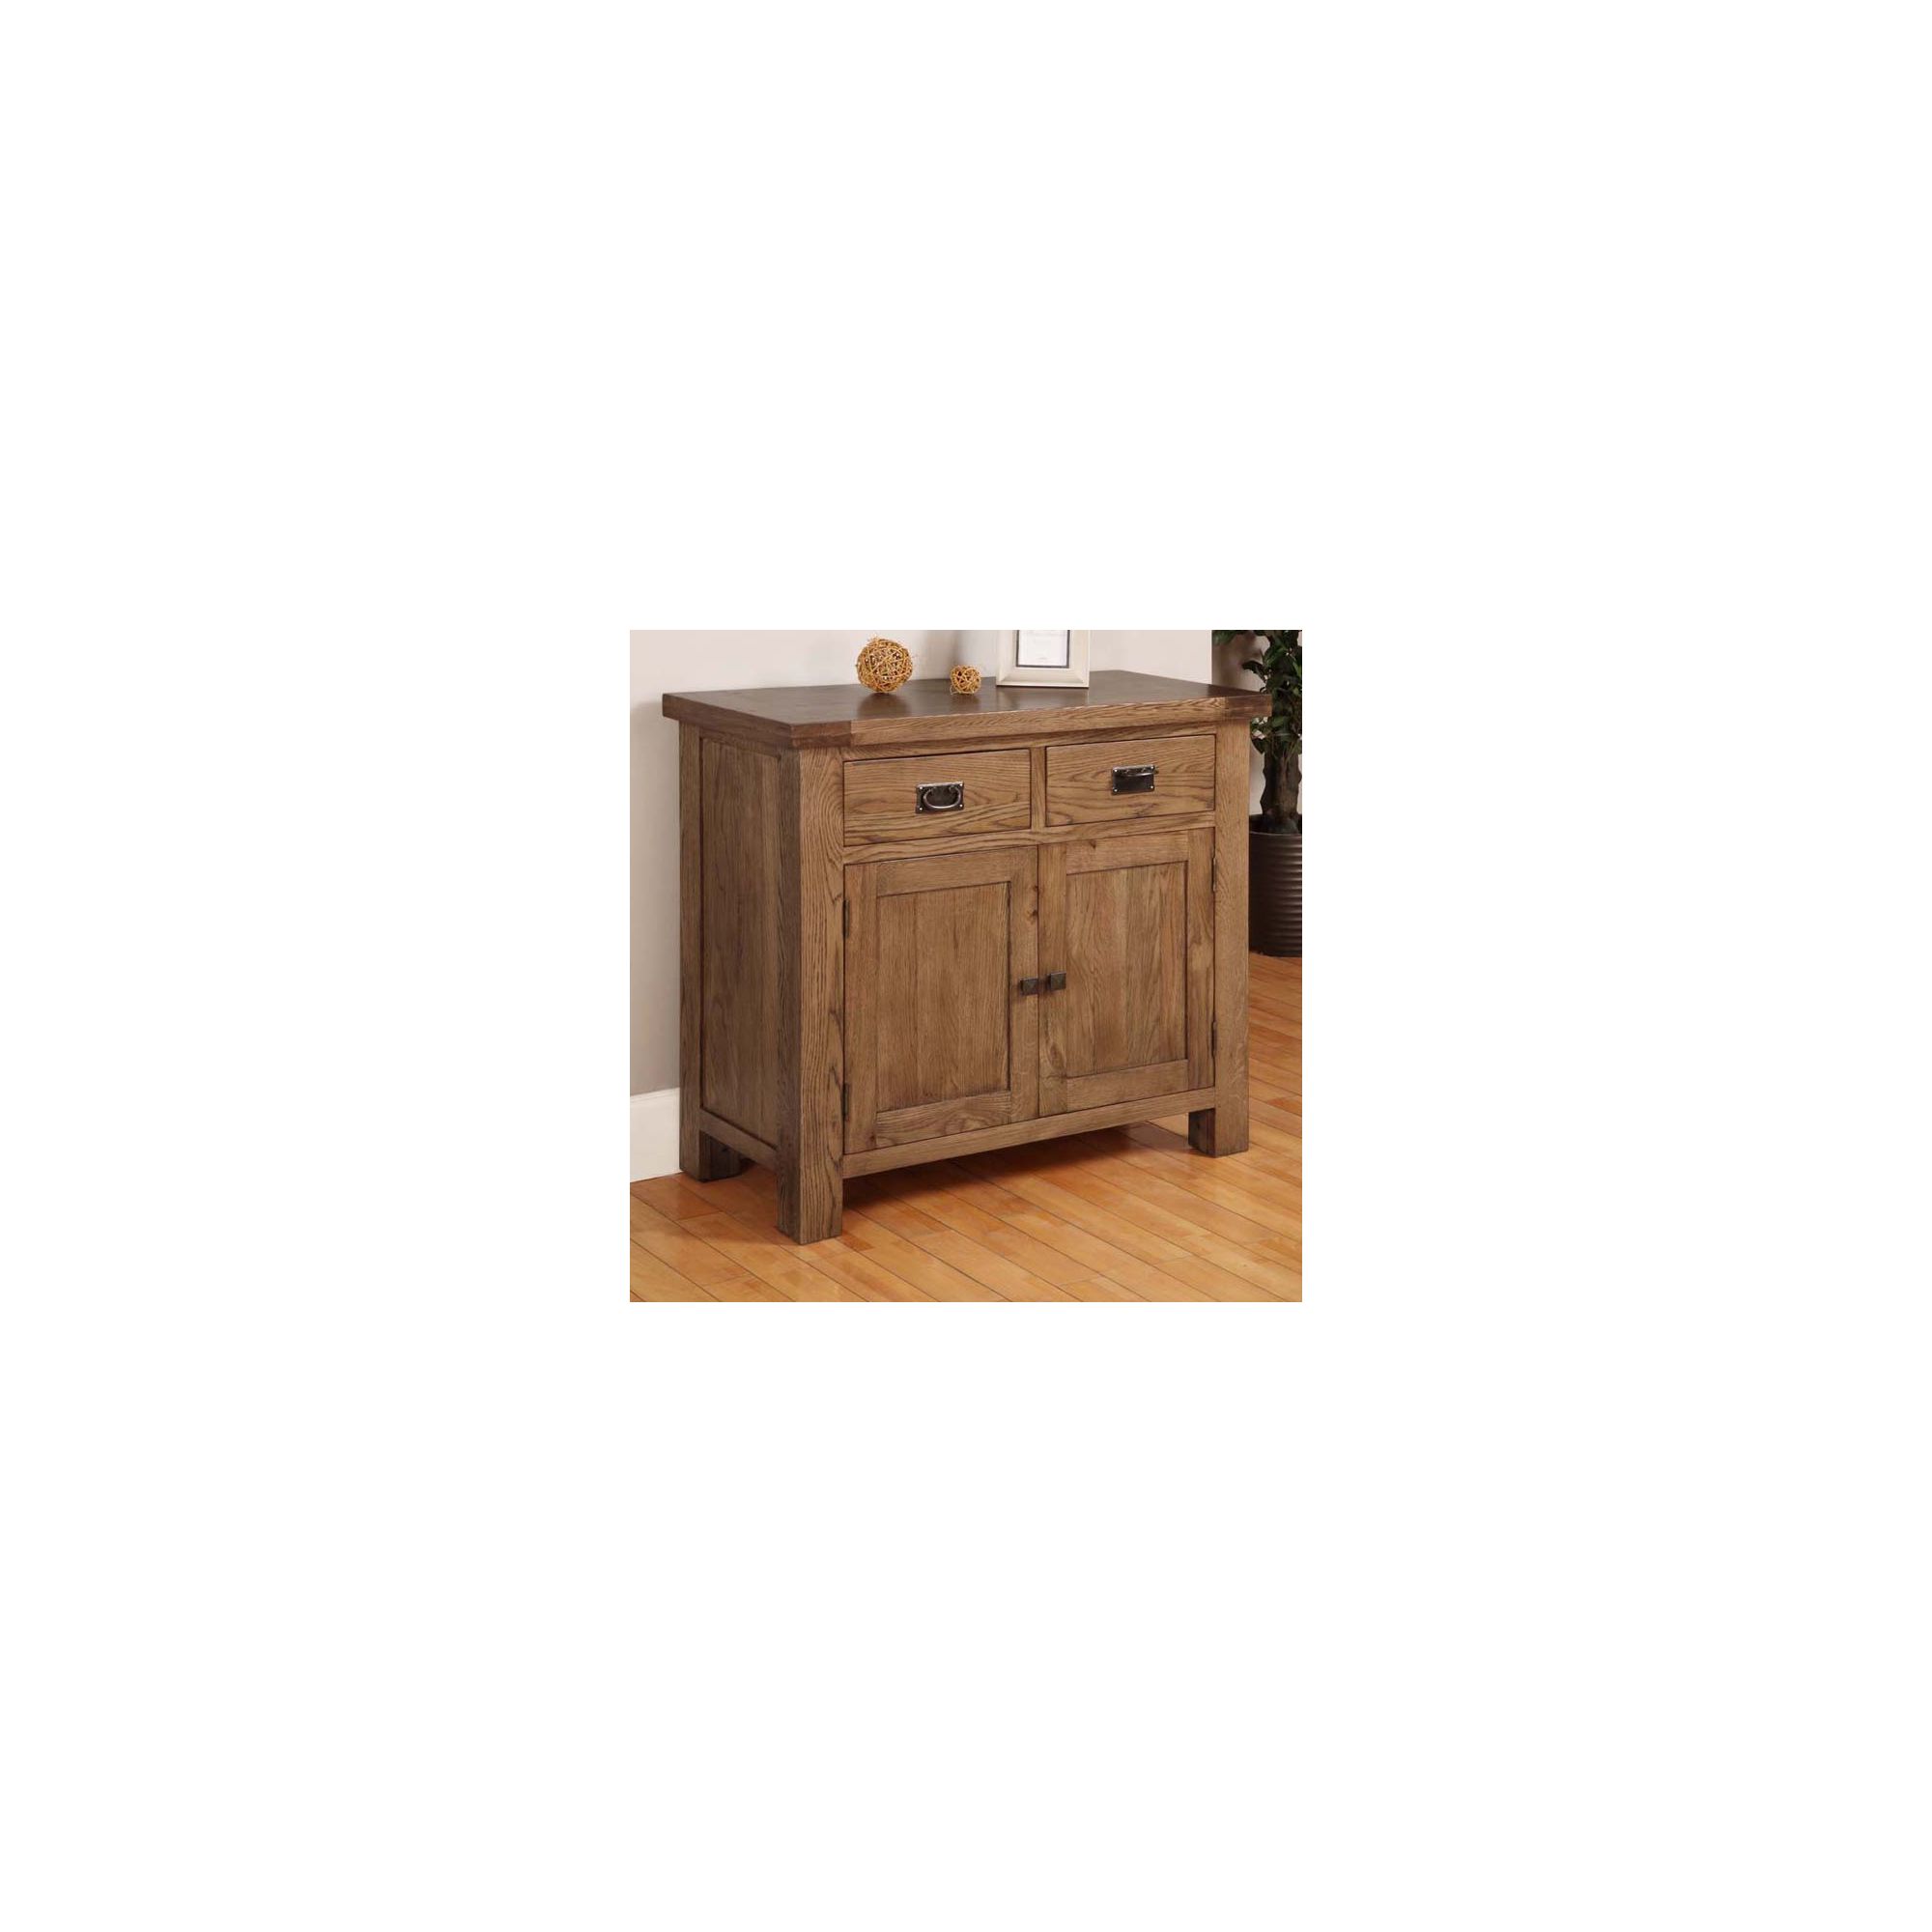 Hawkshead Brooklyn Two Door and Two Drawer Dresser in Rich Patina at Tescos Direct